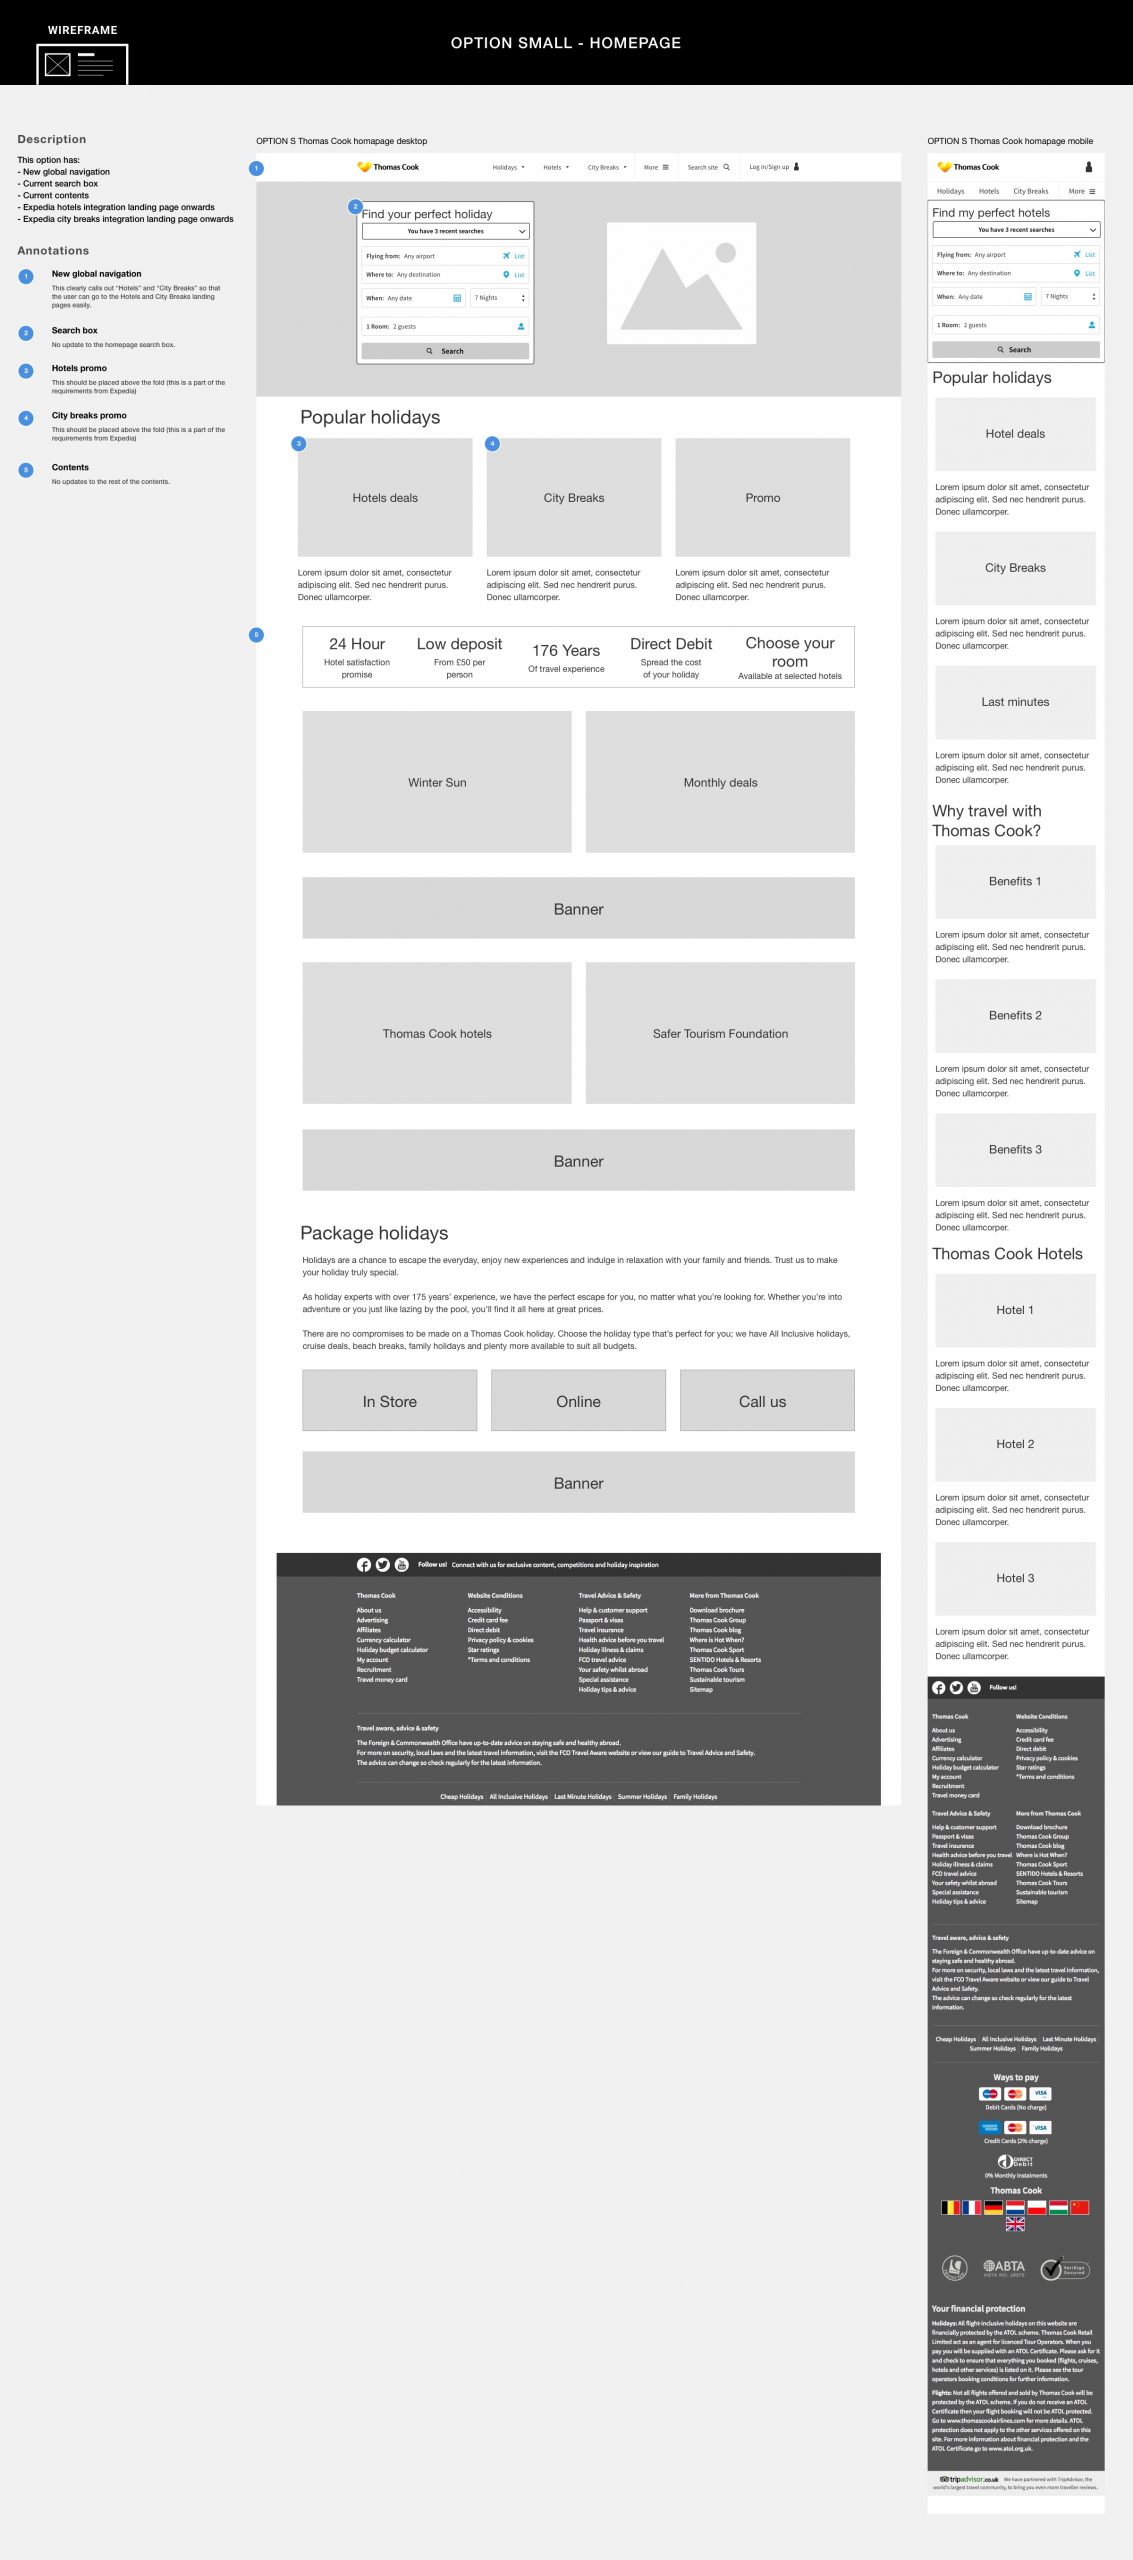 Wireframes of Option S